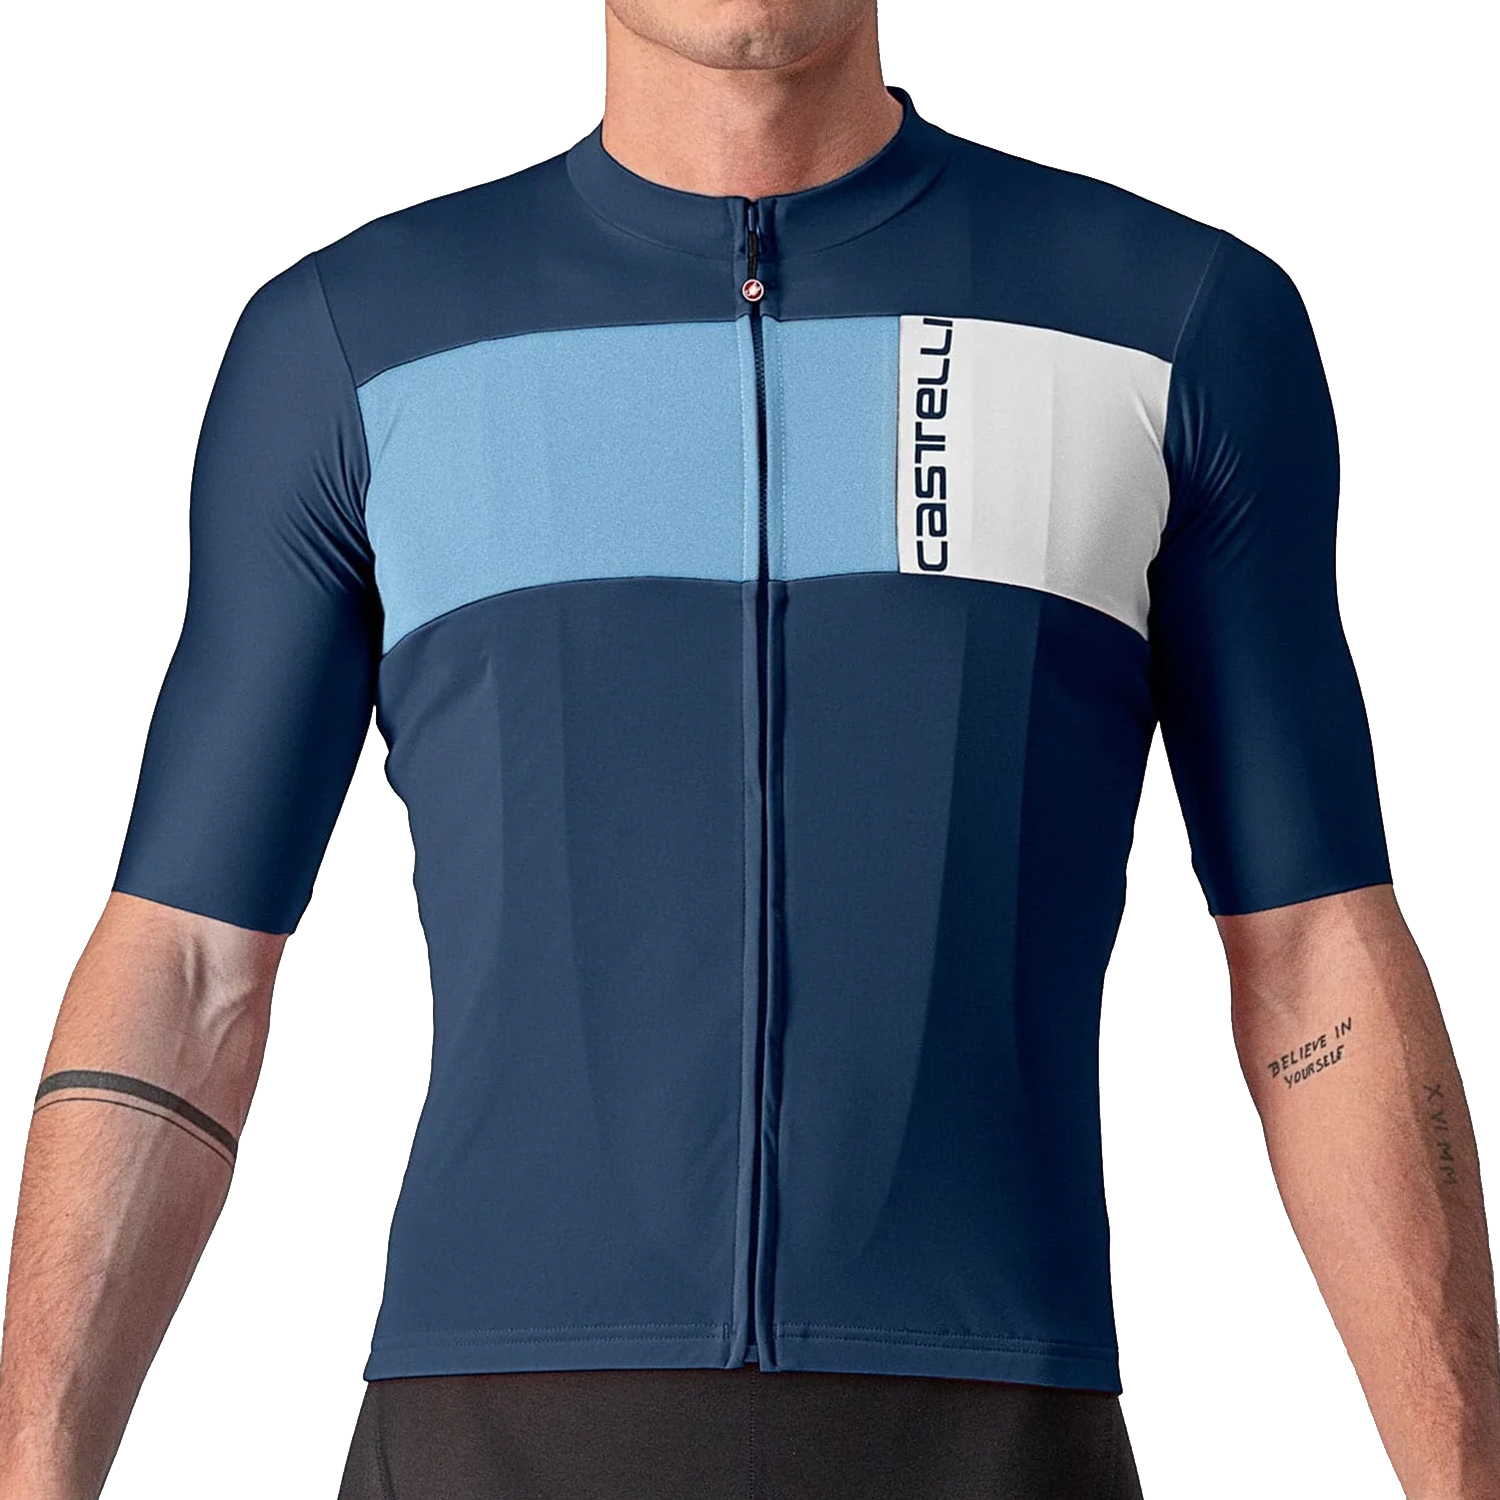 Castelli Prologo 7 Short Sleeve Cycling Jersey - SS23 | Merlin Cycles